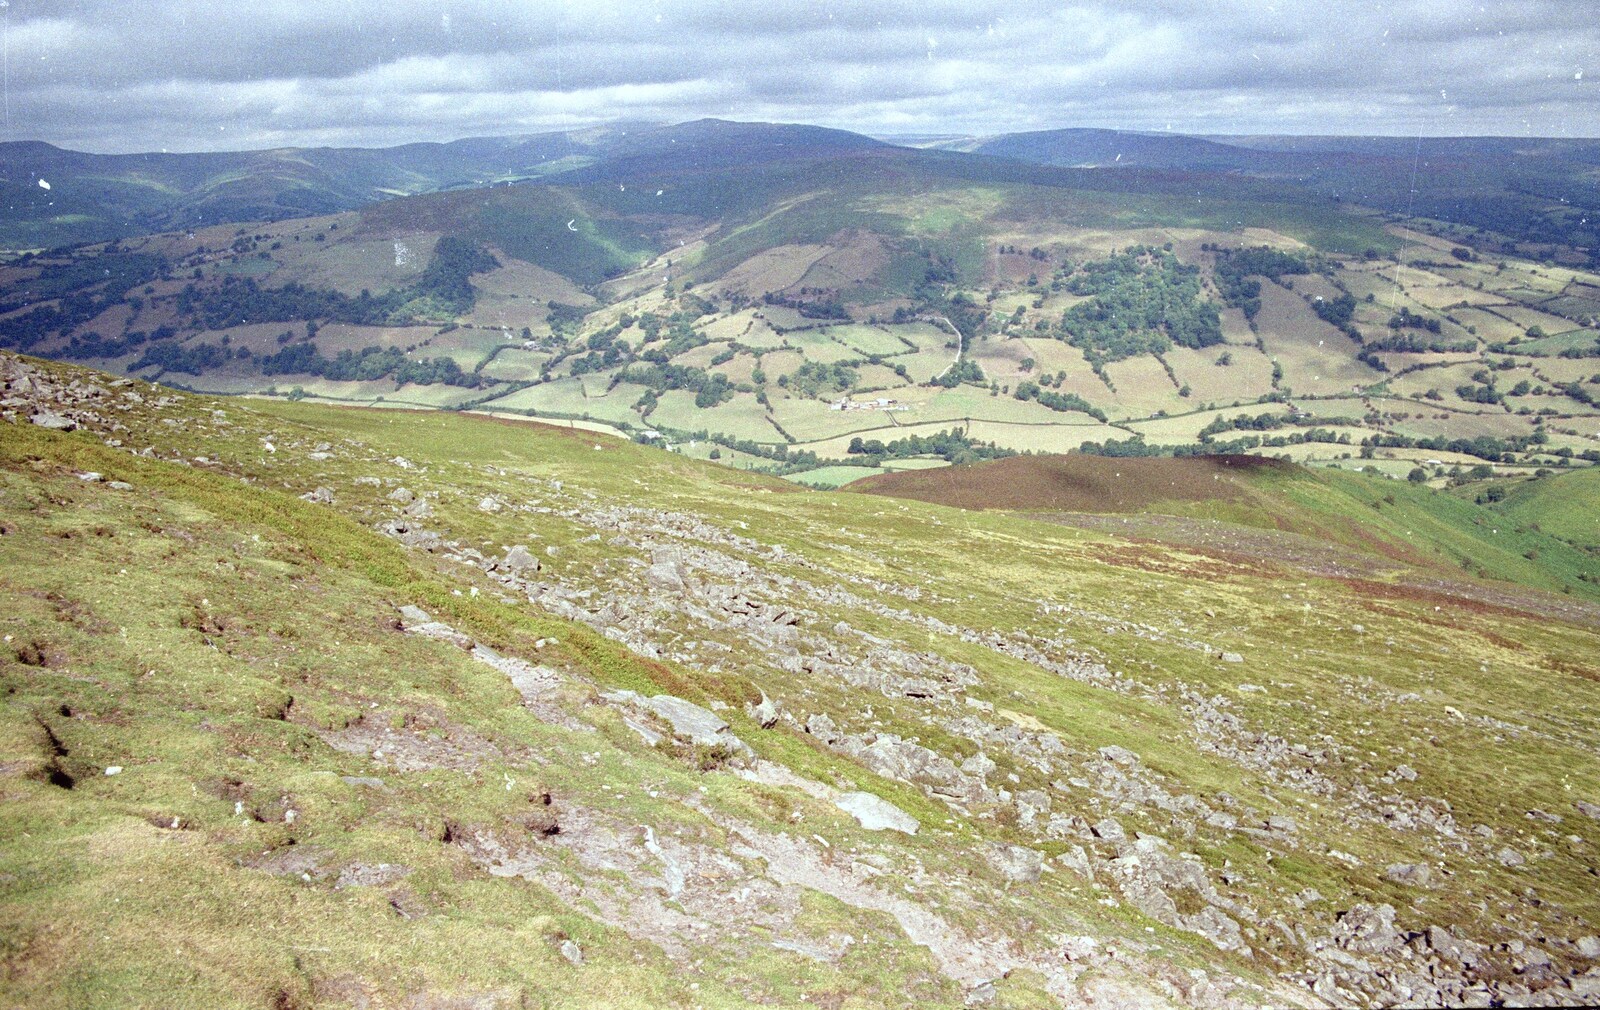 View of the Brecon Beacons from A Walk in the Brecon Beacons, Bannau Brycheiniog, Wales - 5th August 1990